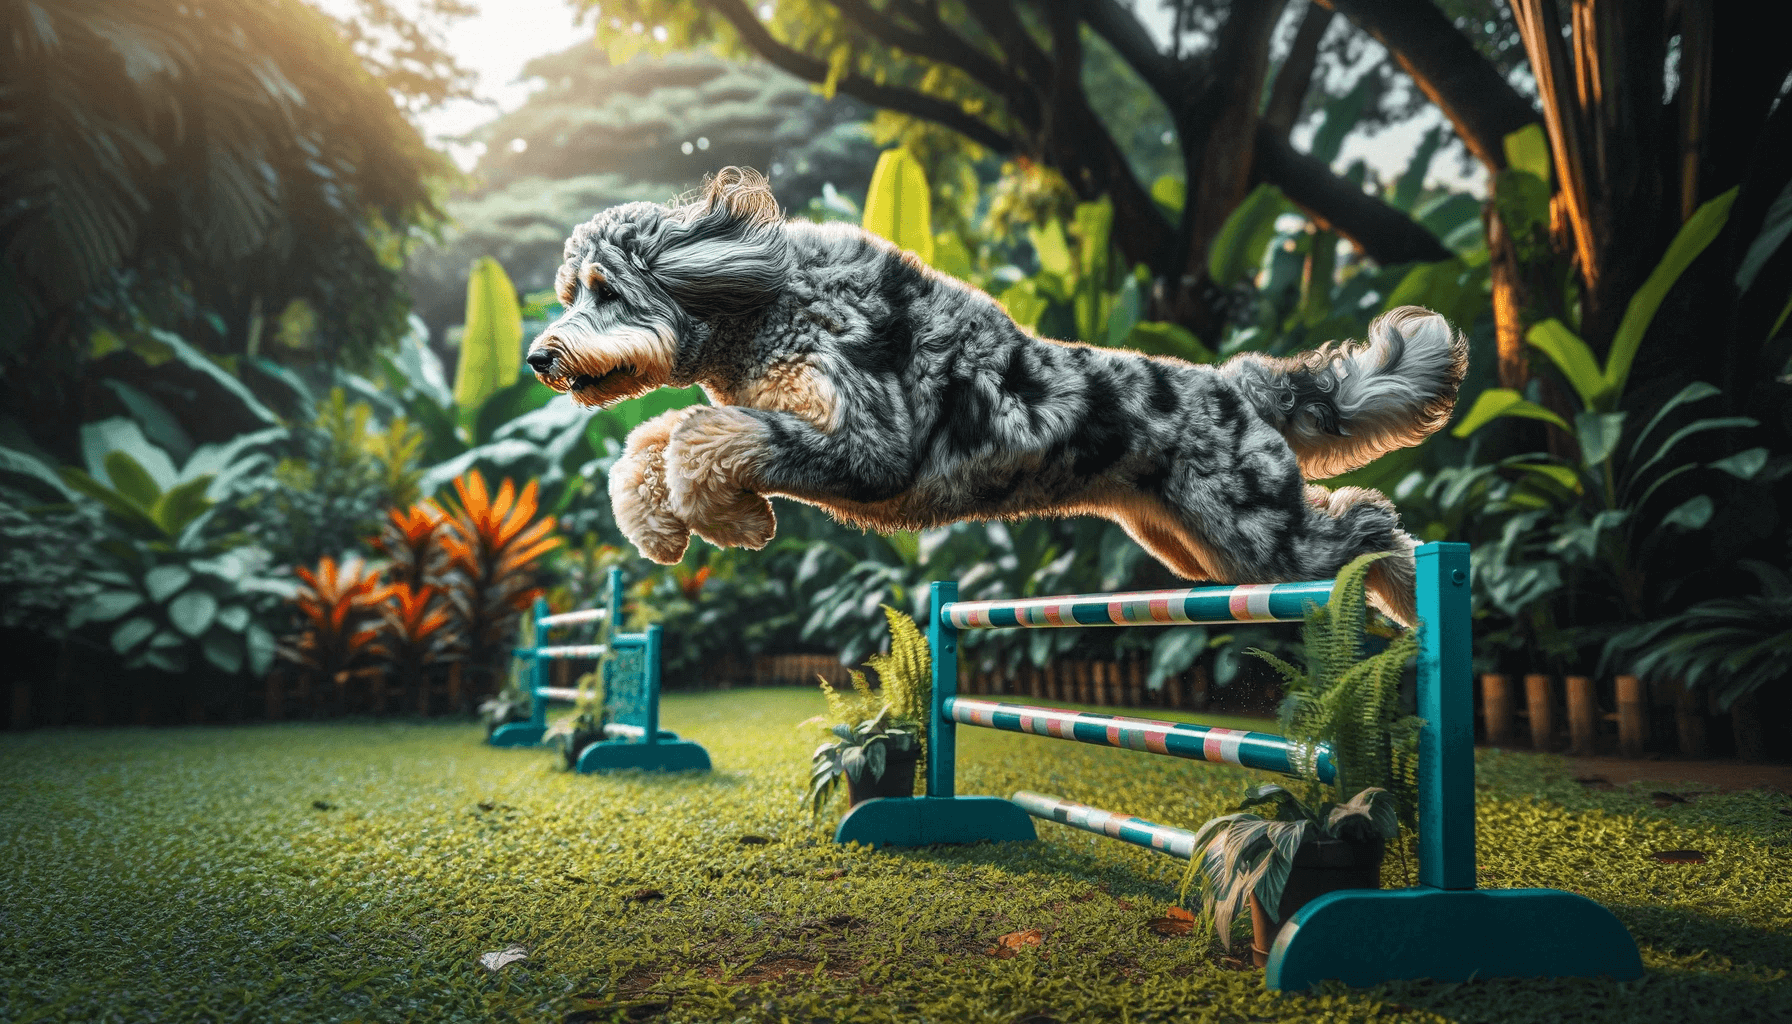 Merle Aussiedoodle showcasing its agility, captured mid-leap over a hurdle in a park setting surrounded by lush greenery.